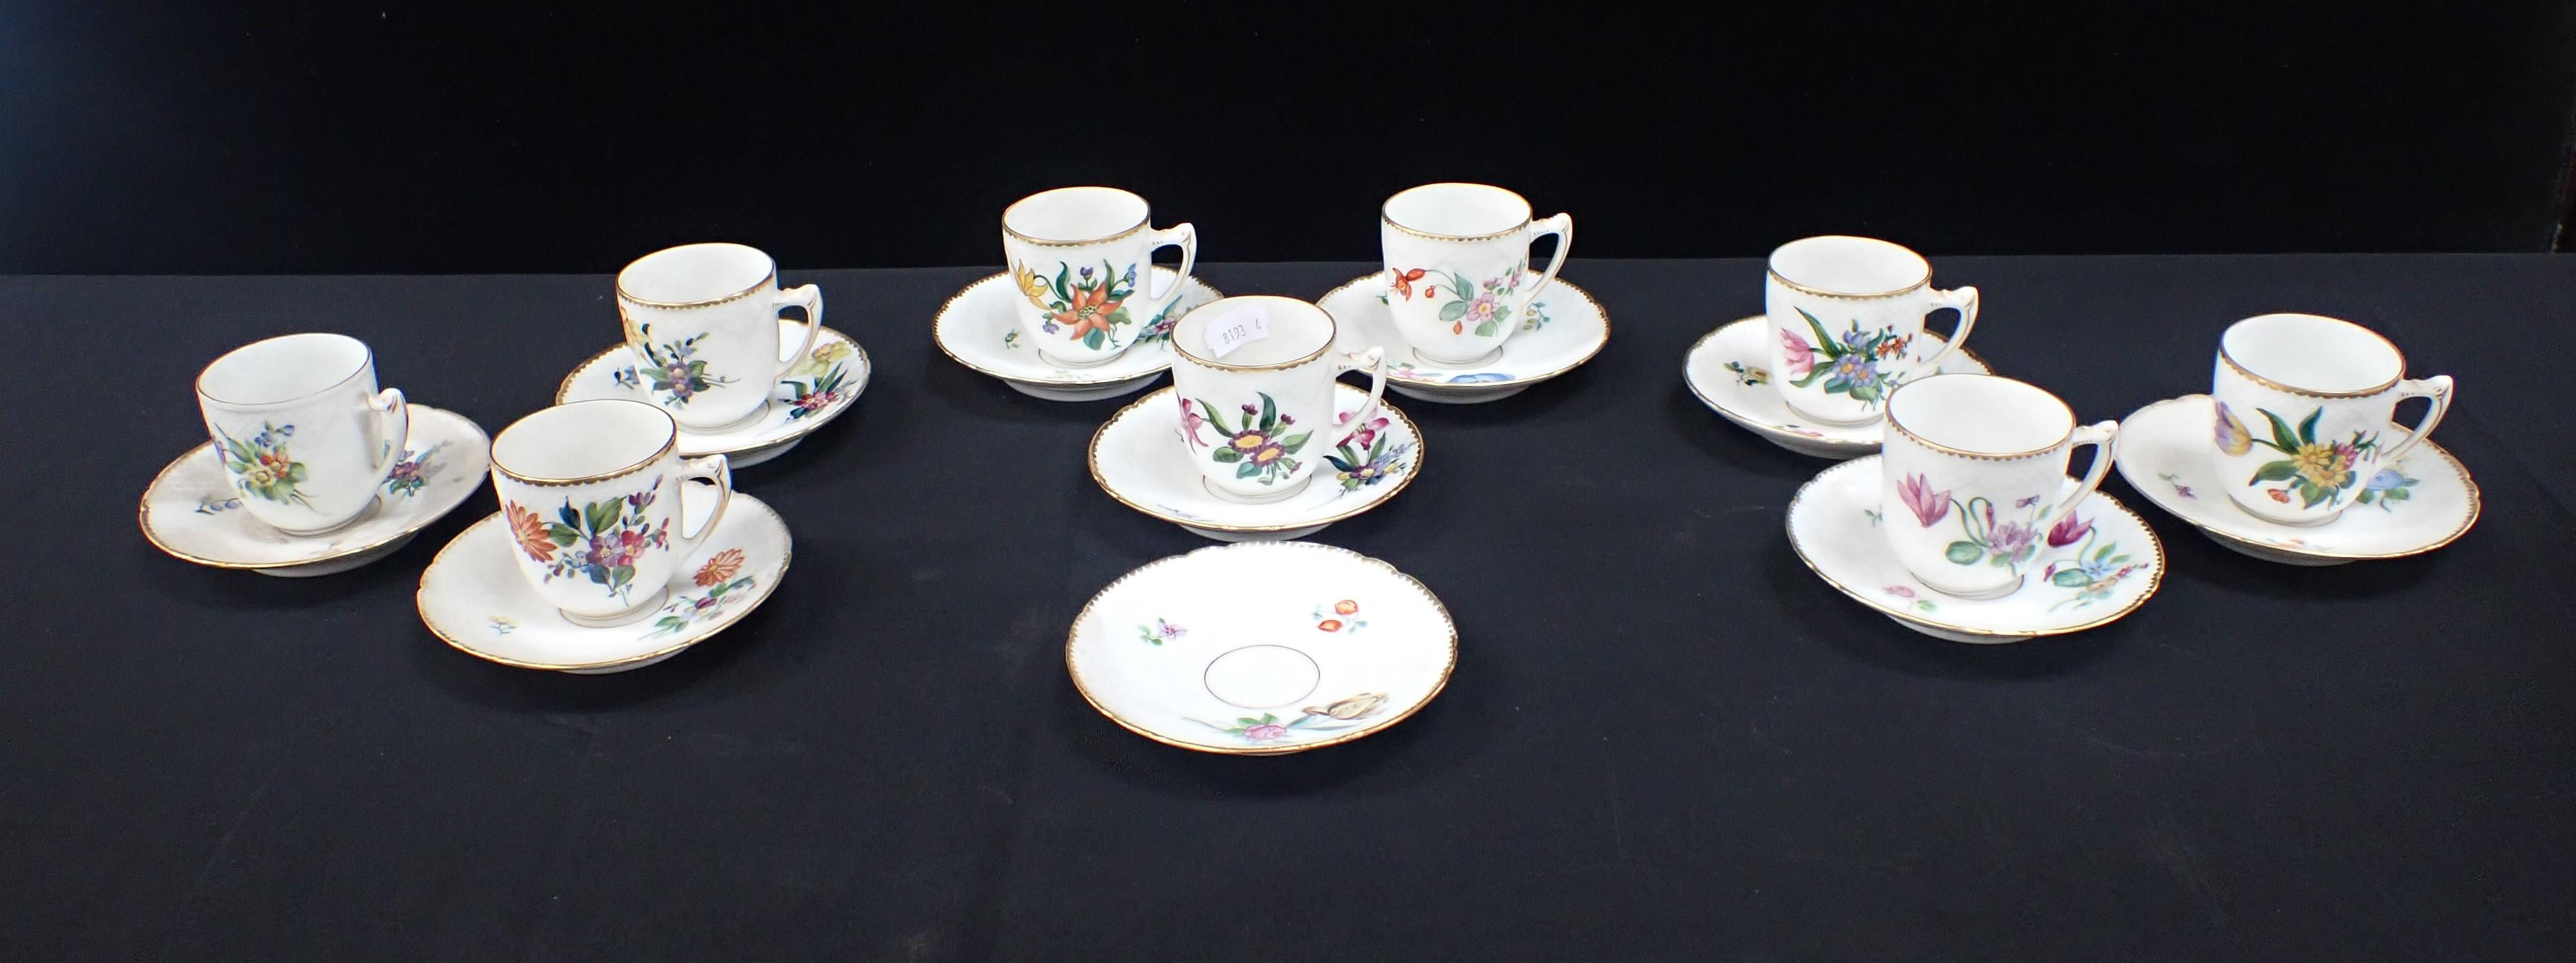 A PART SET OF BING & GRONDHAL COFFEE CUPS AND SAUCERS